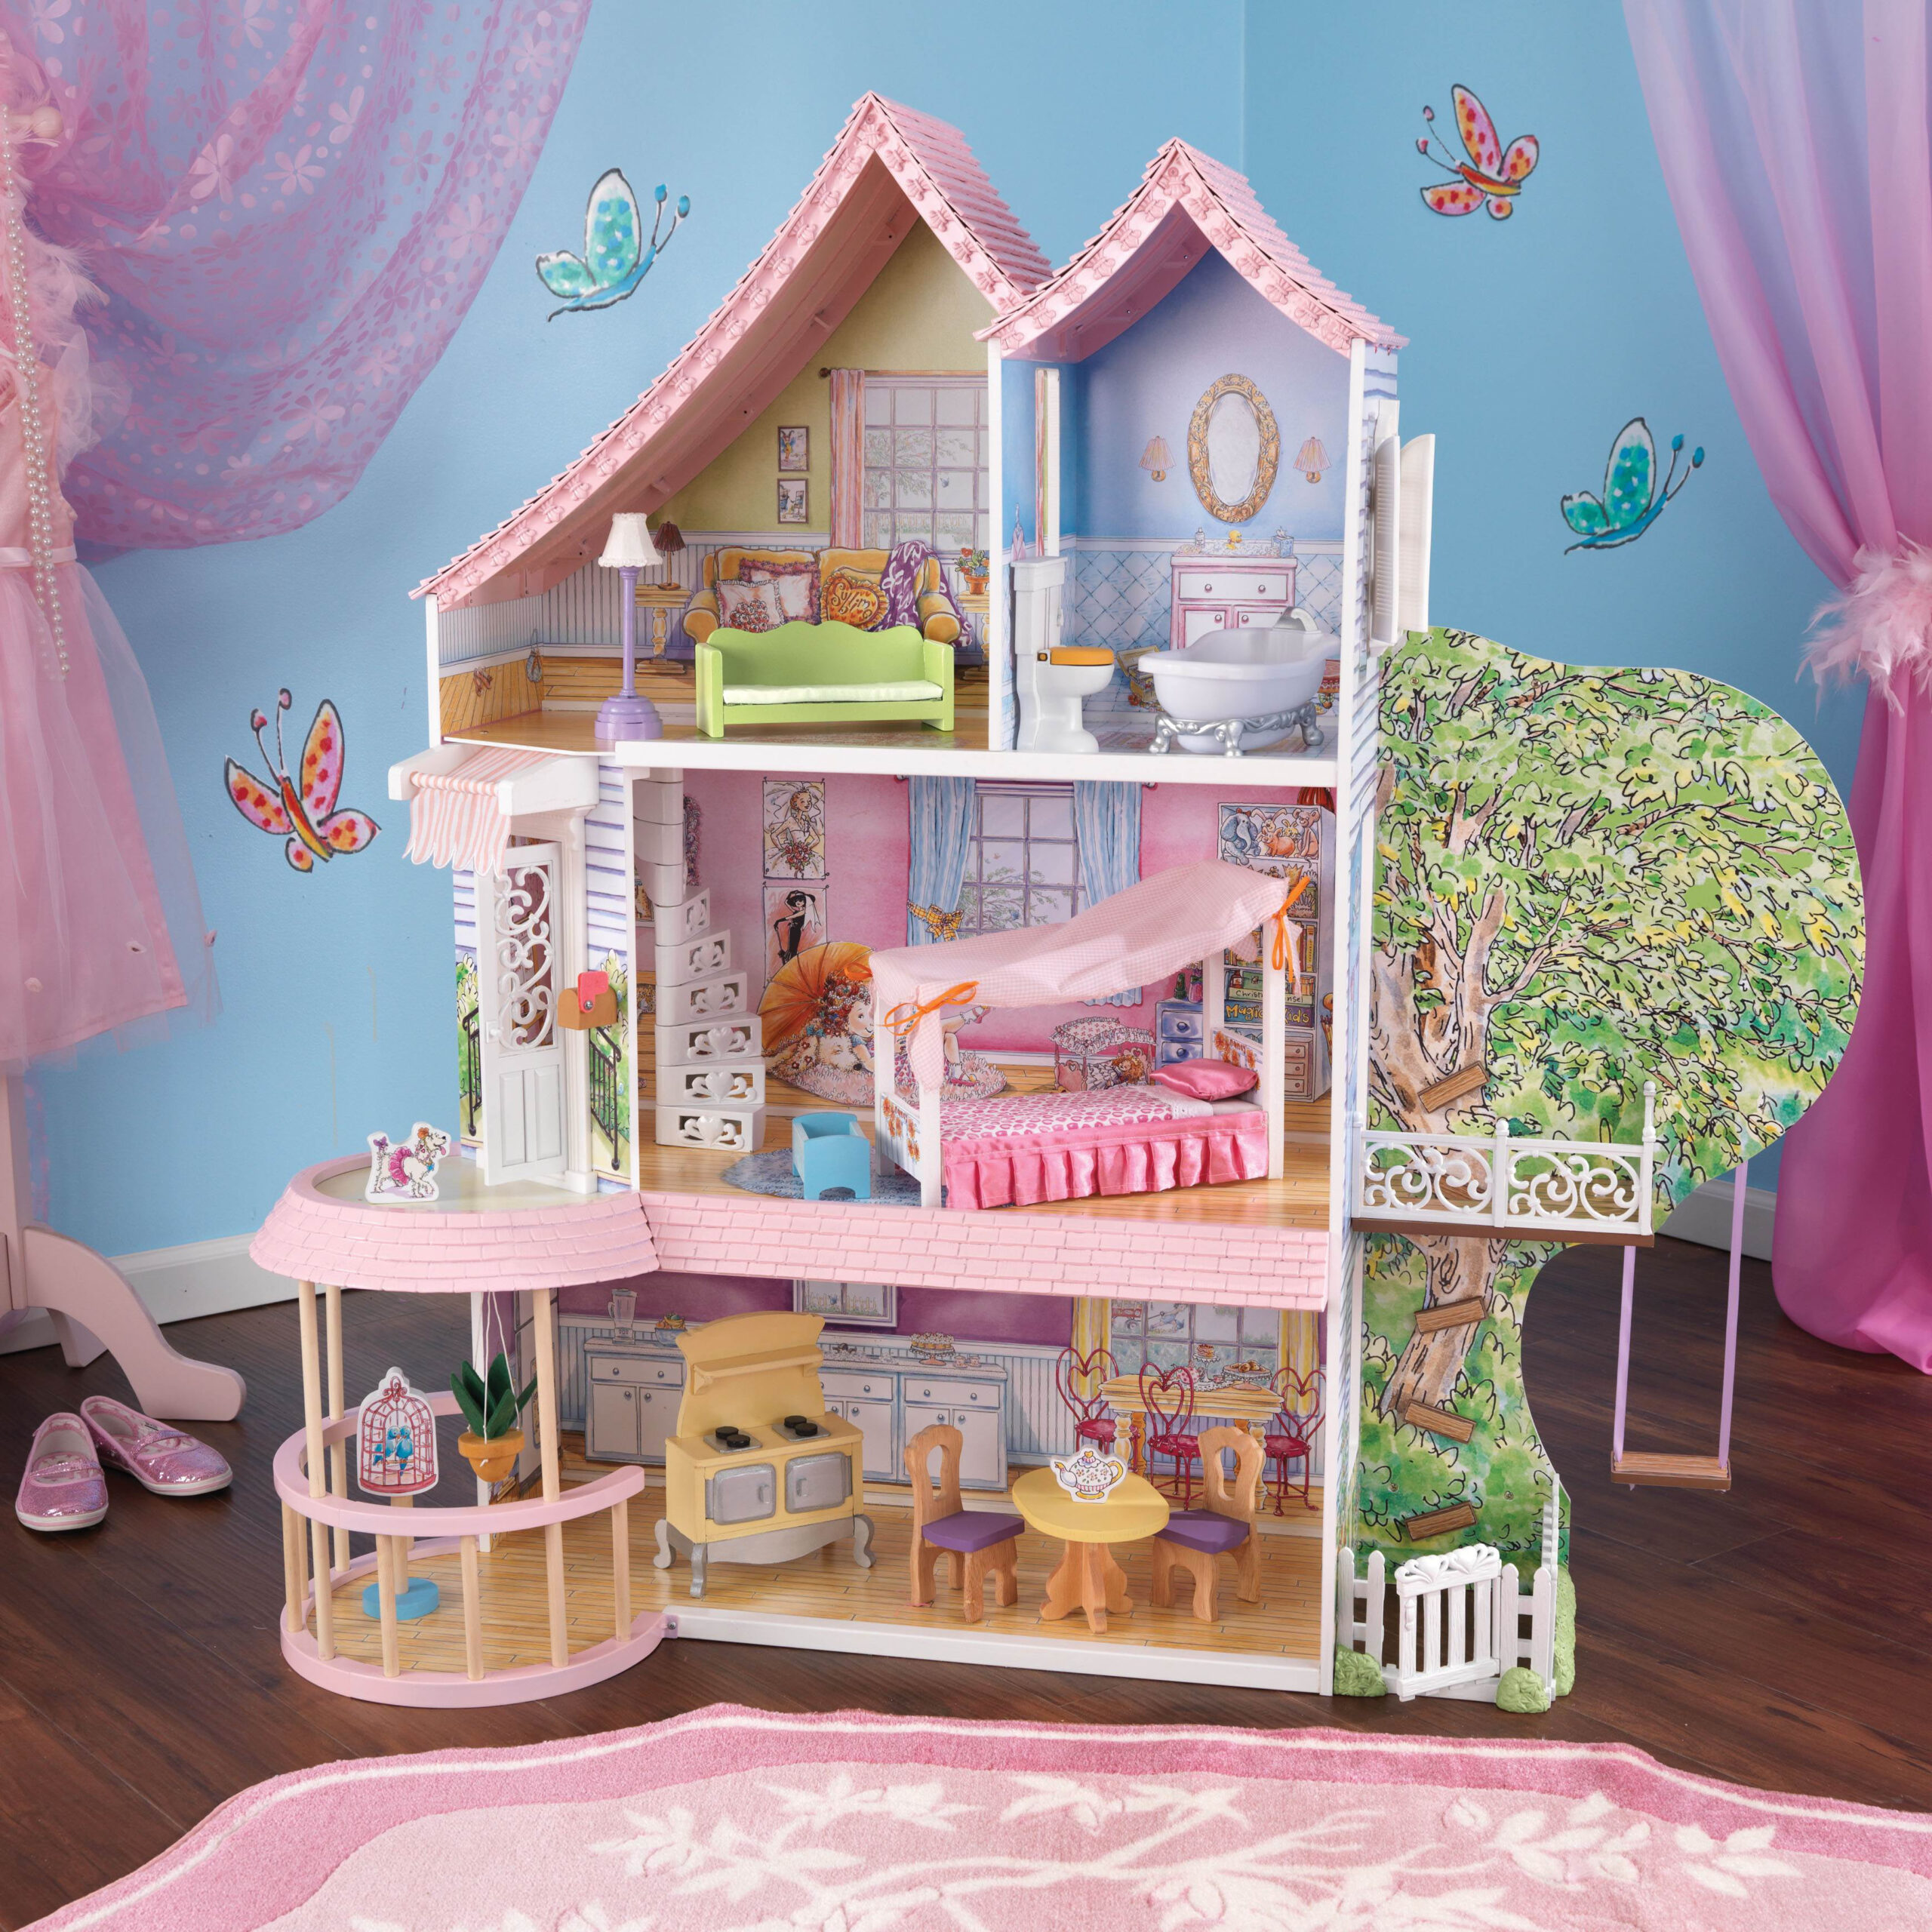 Kidkraft Dollhouse Furniture And Accessories